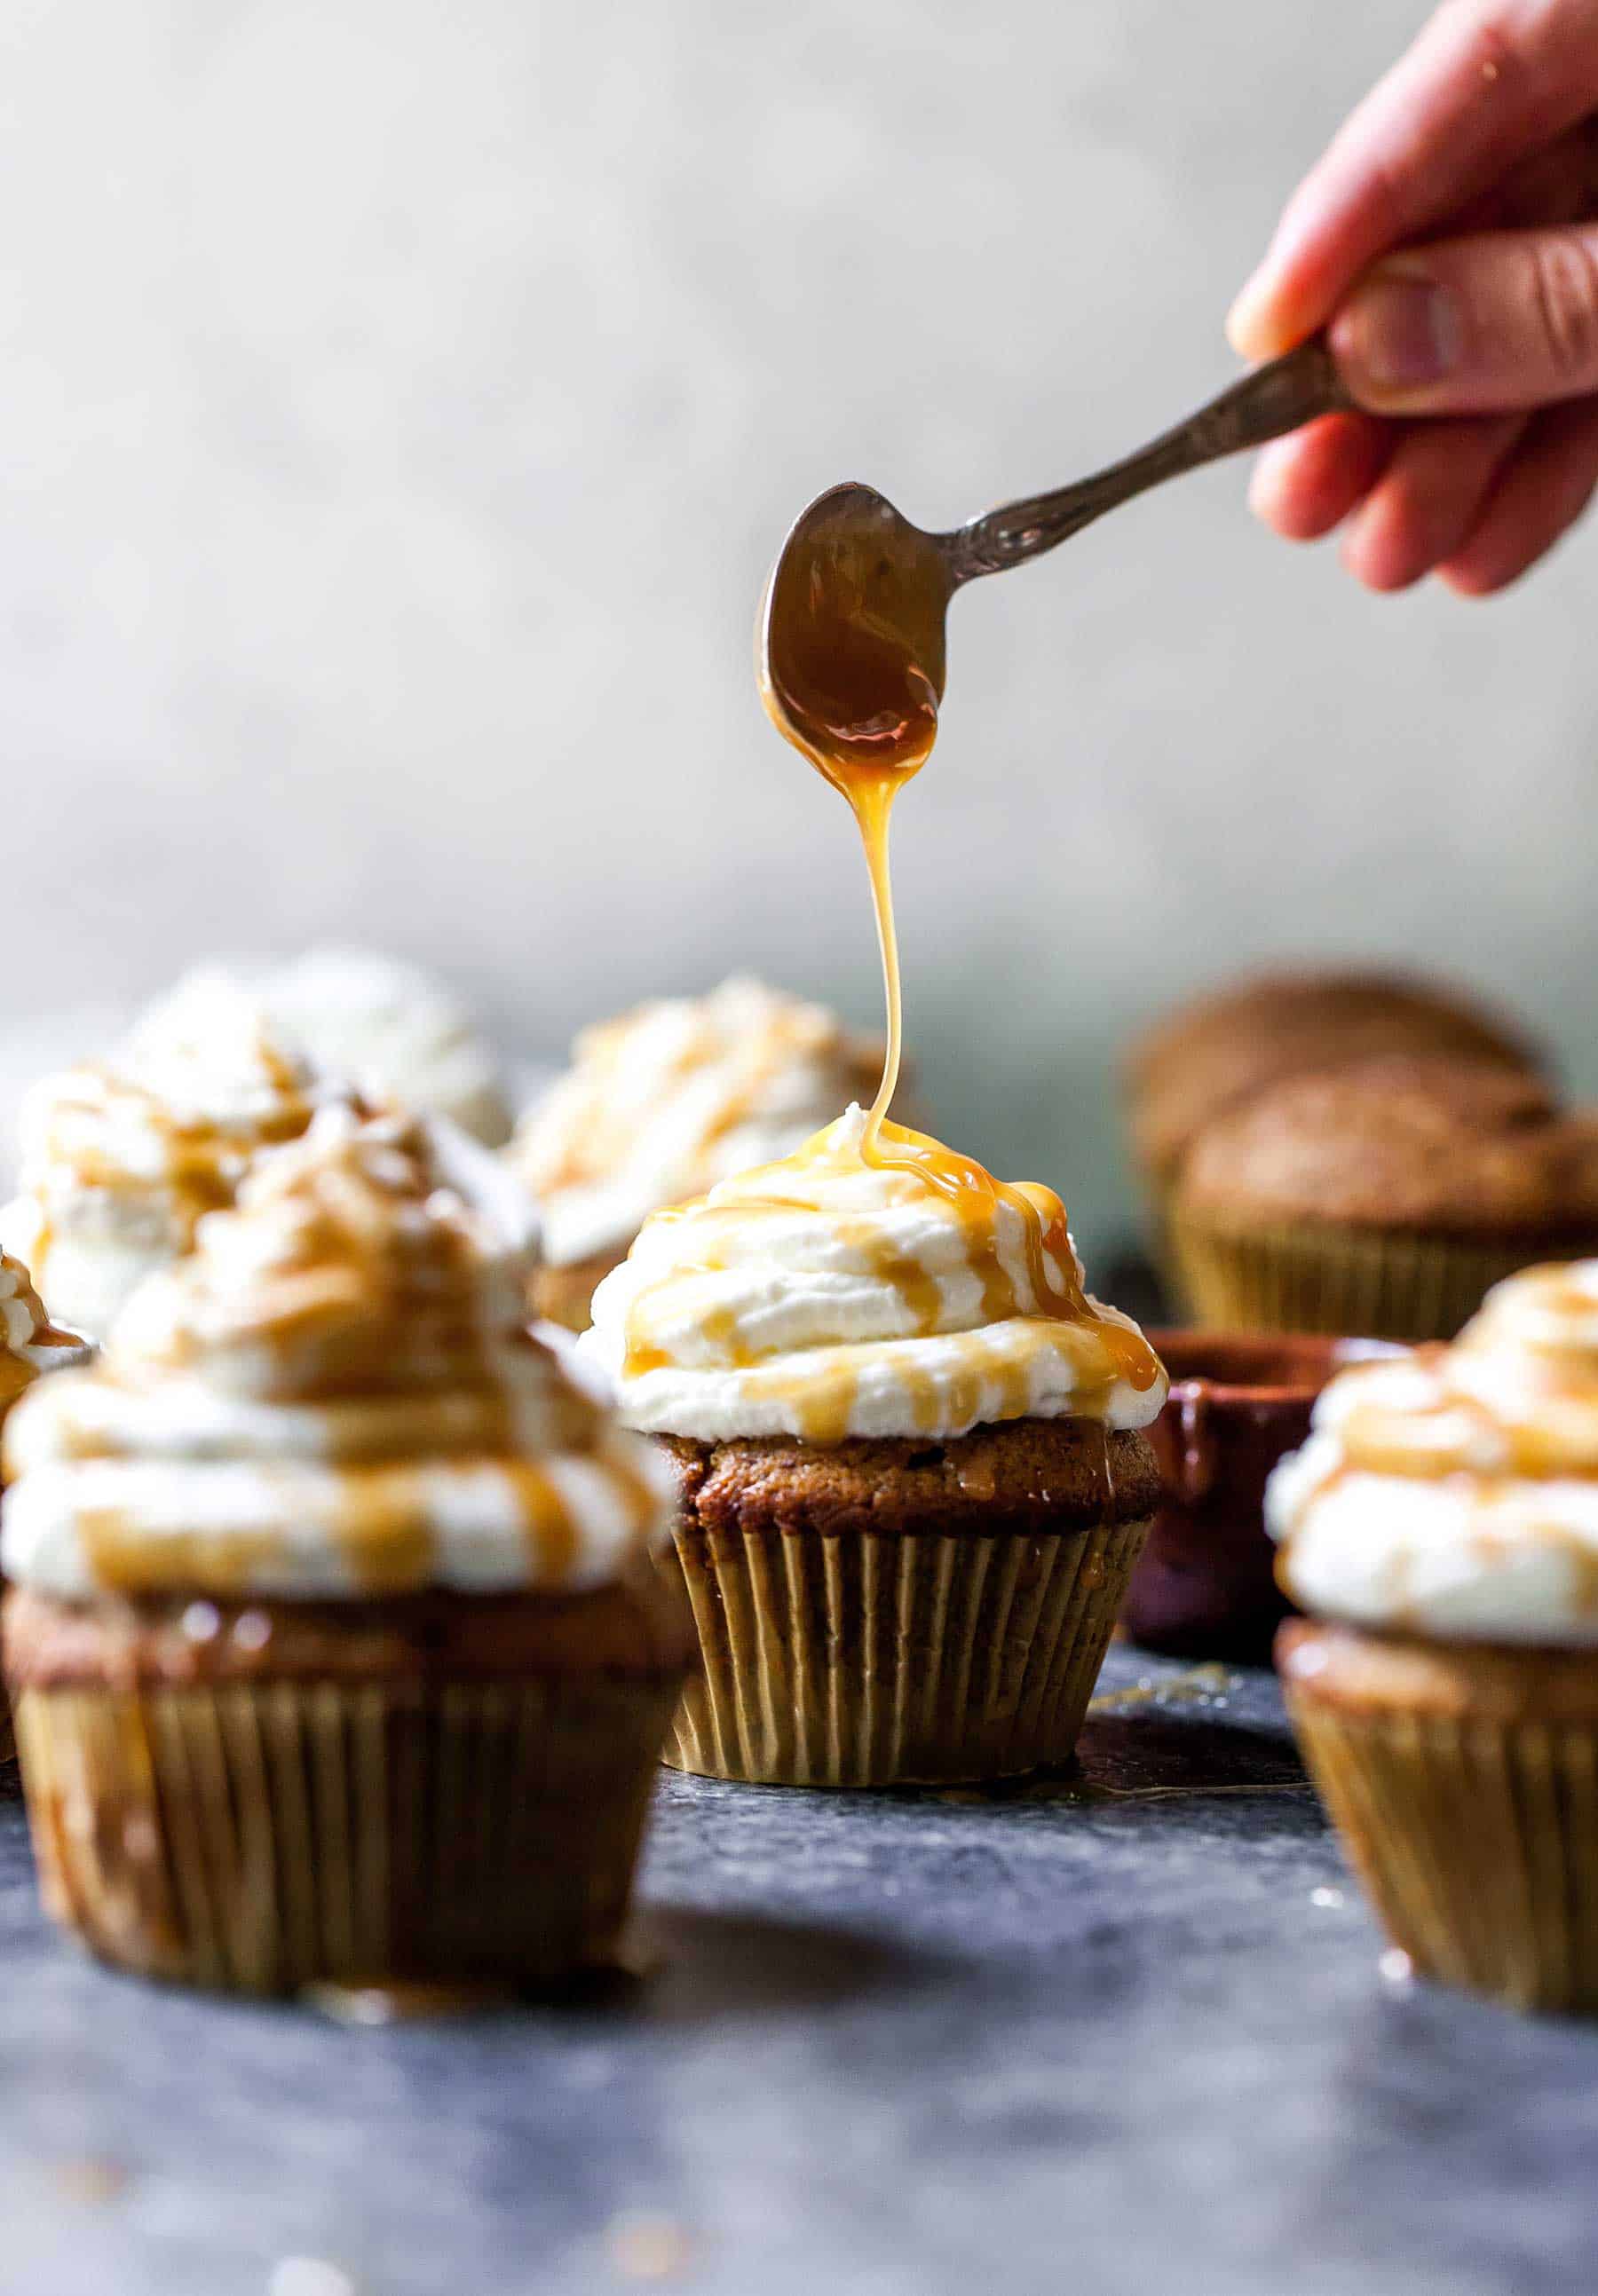 Caramel sauce being drizzled over the tops of pumpkin spice latte cupcakes.